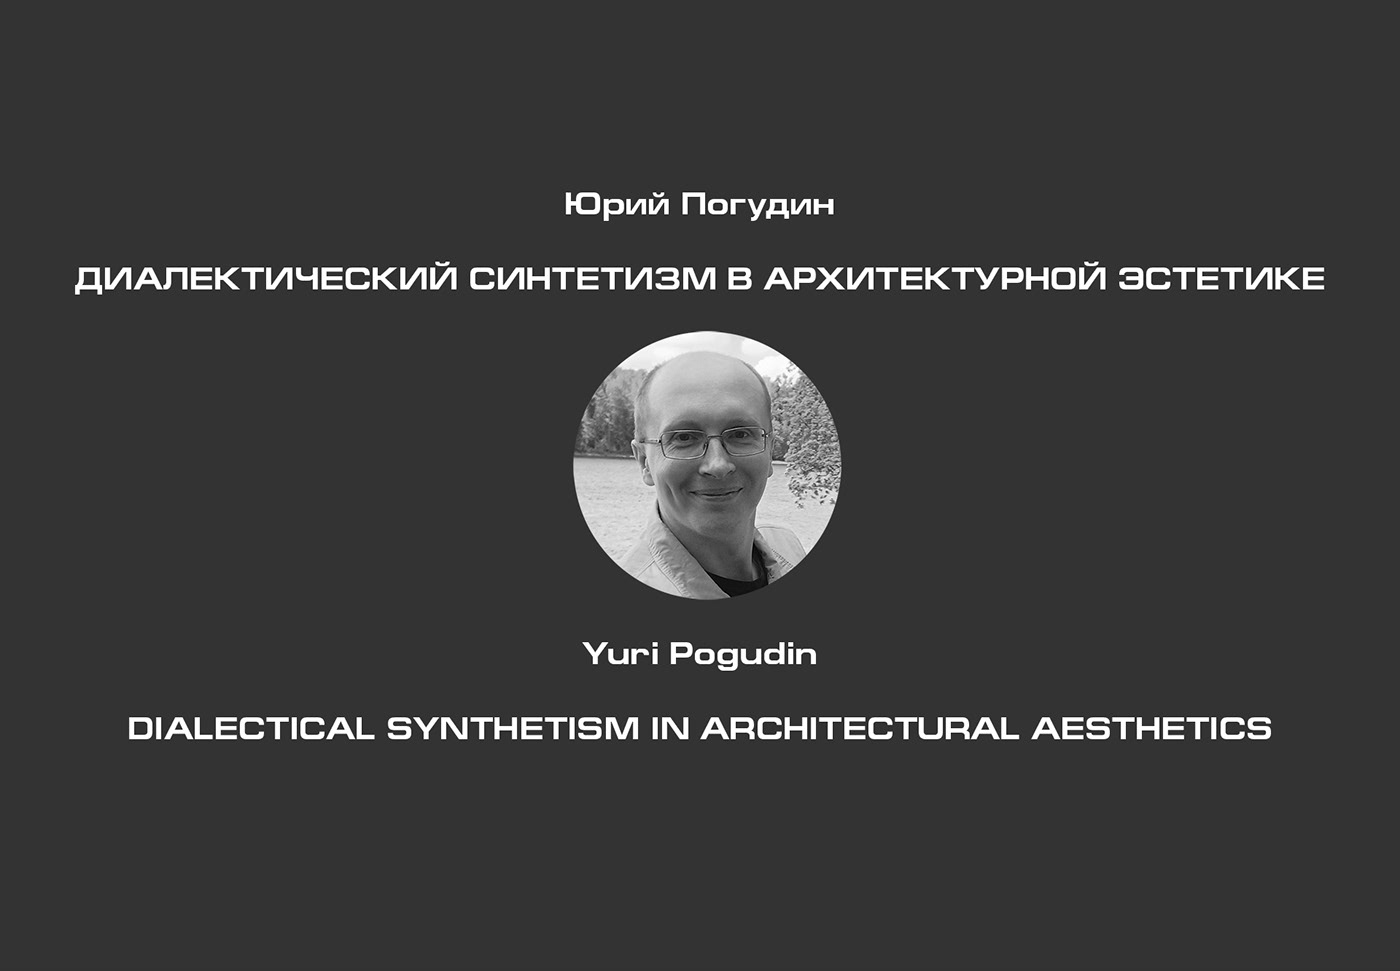 archineo yuripogudin architecture architectural design Architectural Aesthetics architectural fantasia dialectical architecture dialectical synthetism